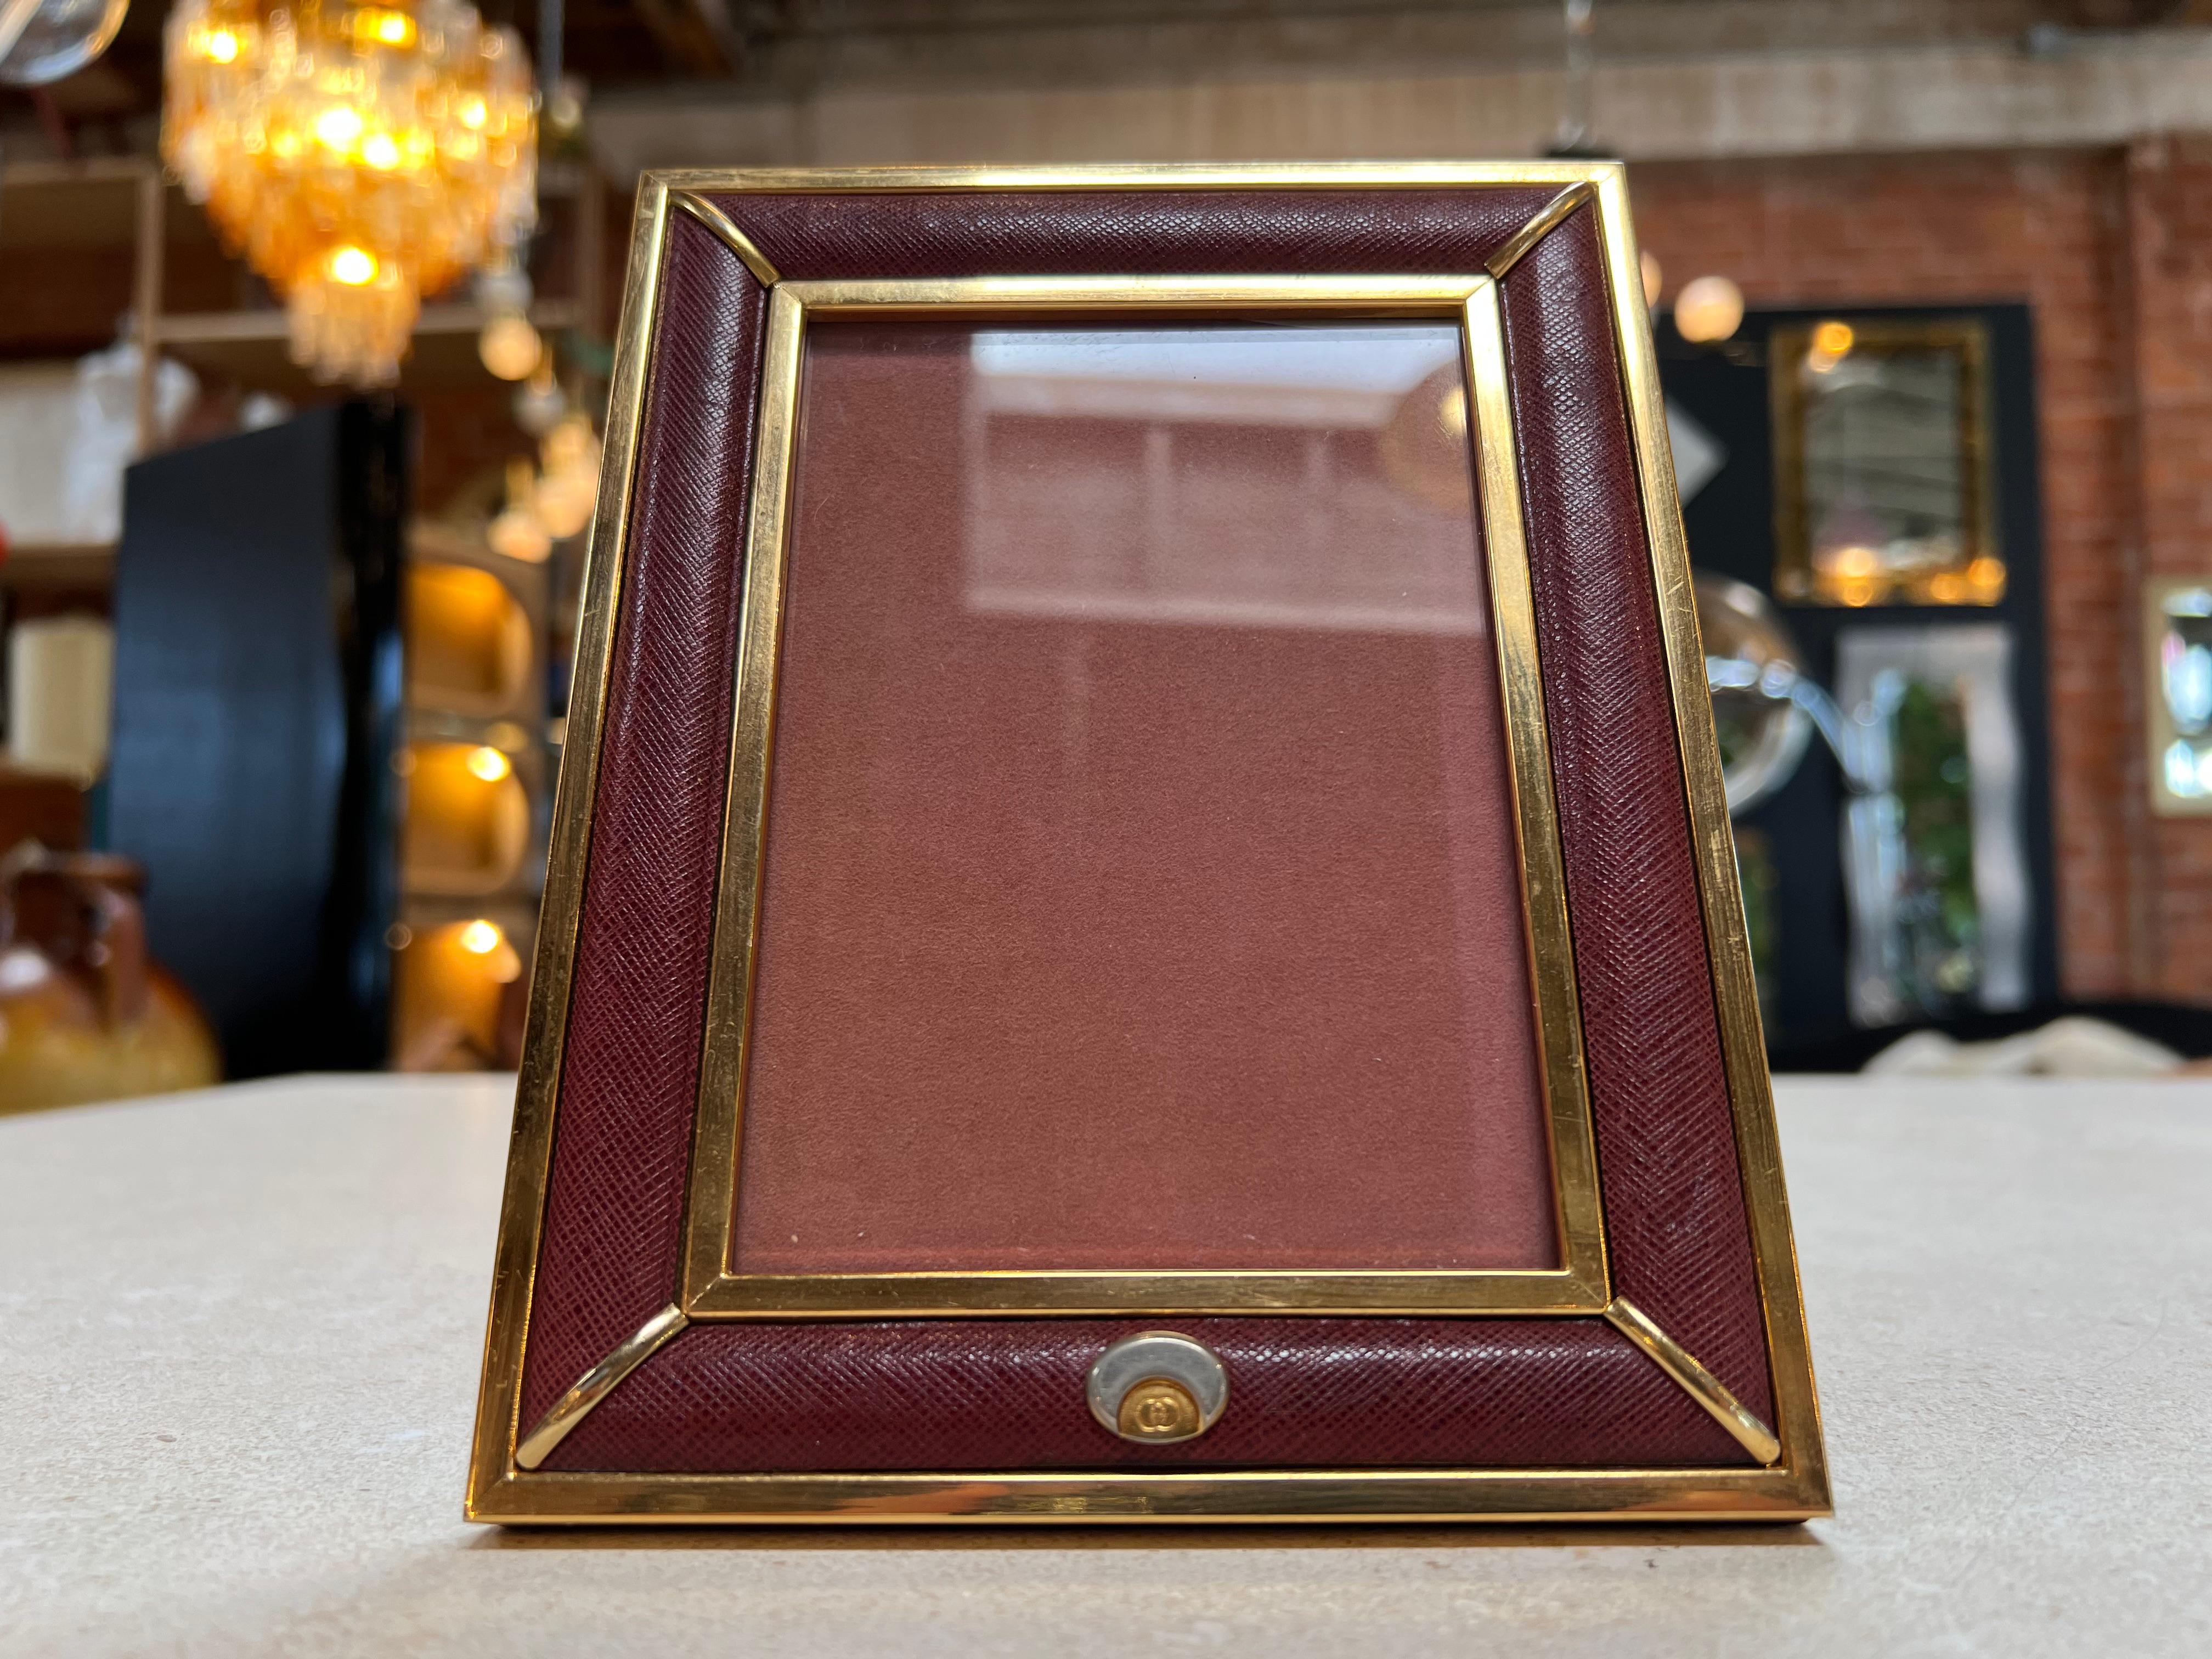 An elegant and classic picture frame from the 1980s by the iconic luxury brand Gucci. This vintage piece boasts a refined design with high-quality leather and brass accents, exuding the brand's trademark craftsmanship and timeless style. A perfect